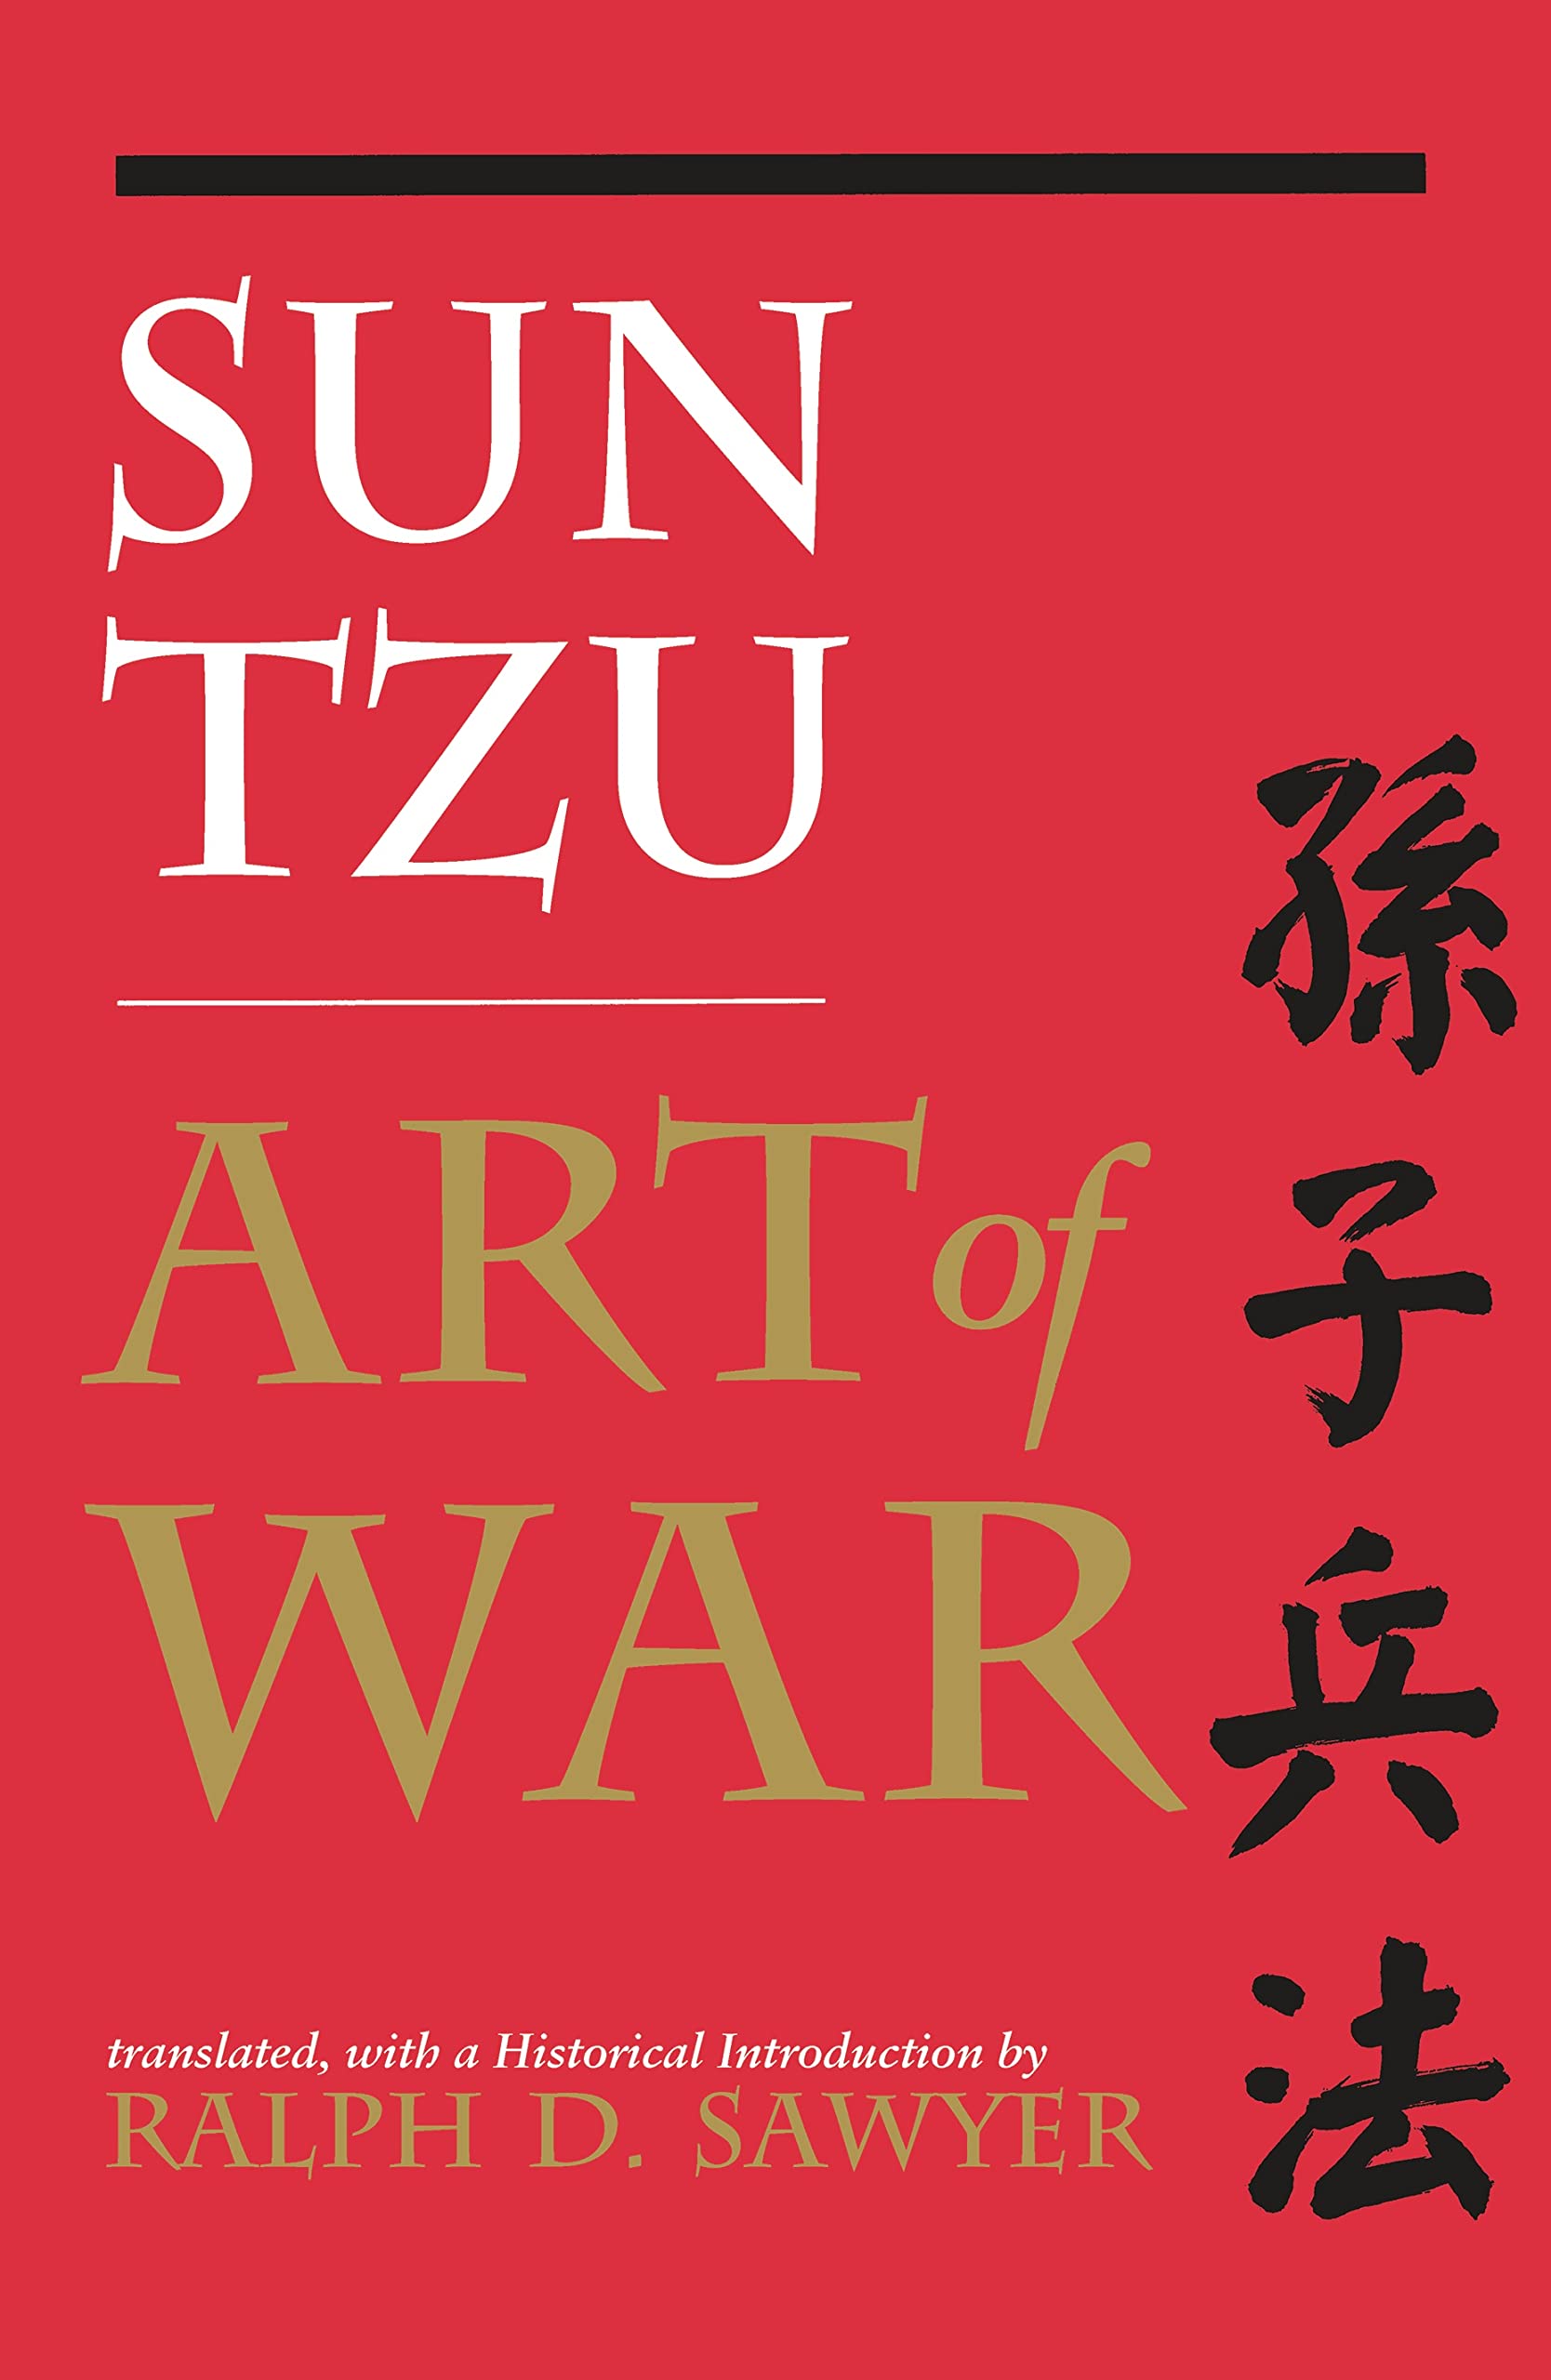 Image of the book: The art of war by Sun Tzu